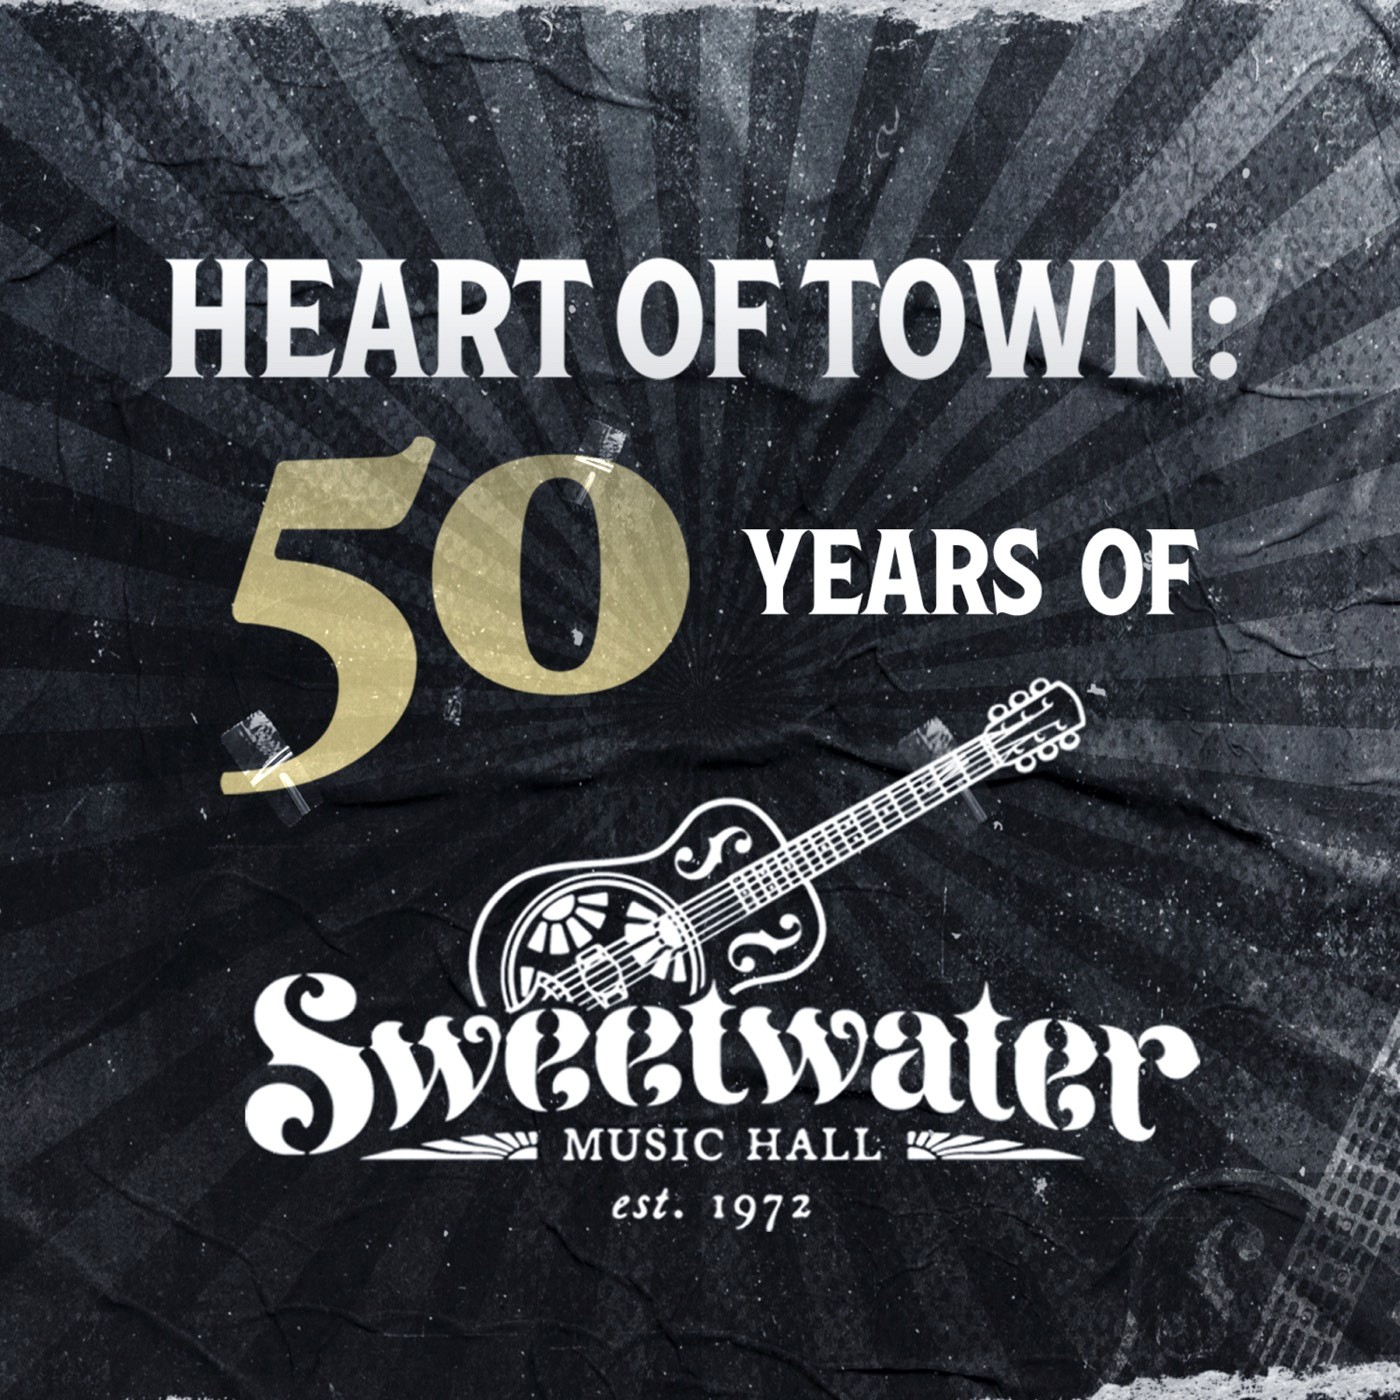 Heart of Town: 50 Years of Sweetwater